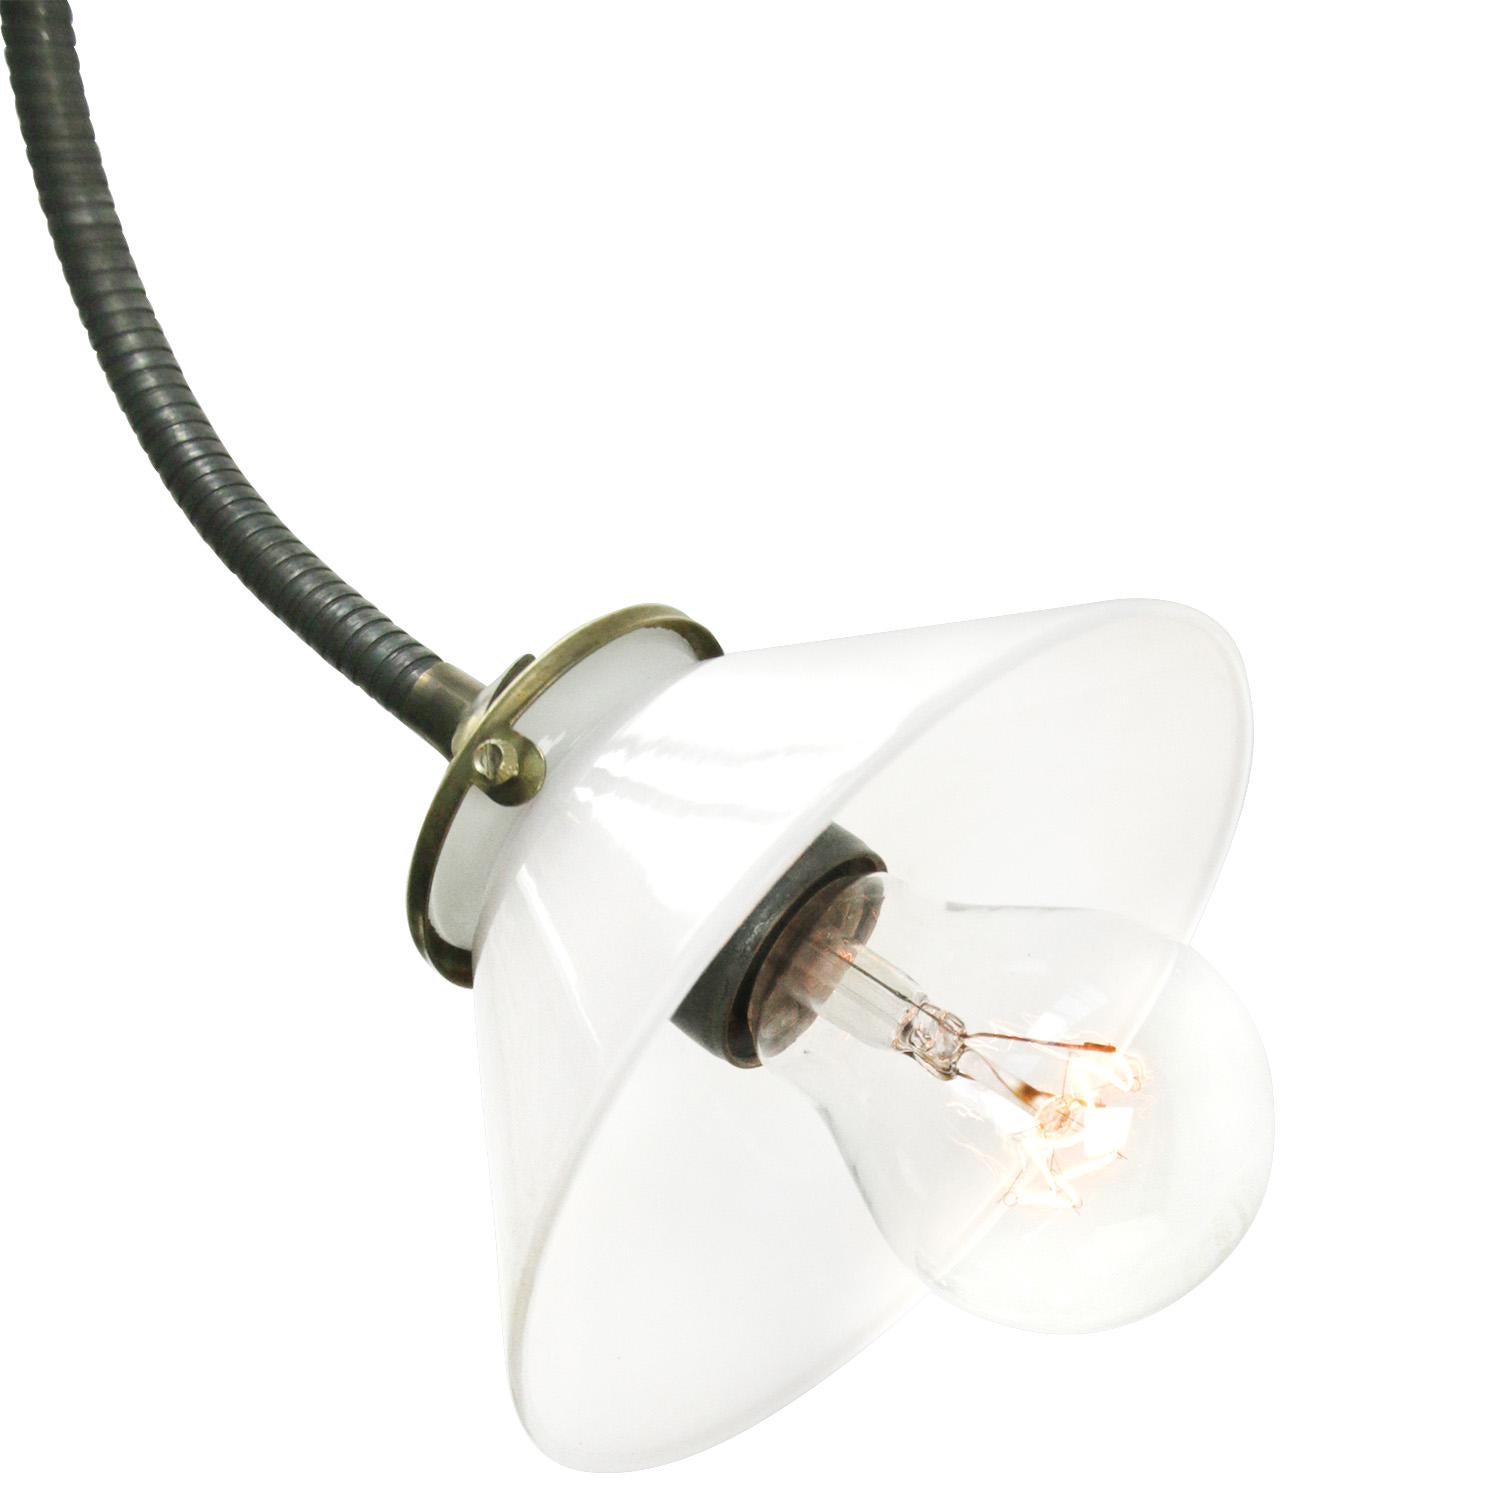 Wall light spot down lighter with clamb
White Opaline glass, light transparent shade
Gooseneck arm adjustable in angle.

Clamb size .. cm.

Weight: 1.40 kg / 3.1 lb

Priced per individual item. All lamps have been made suitable by